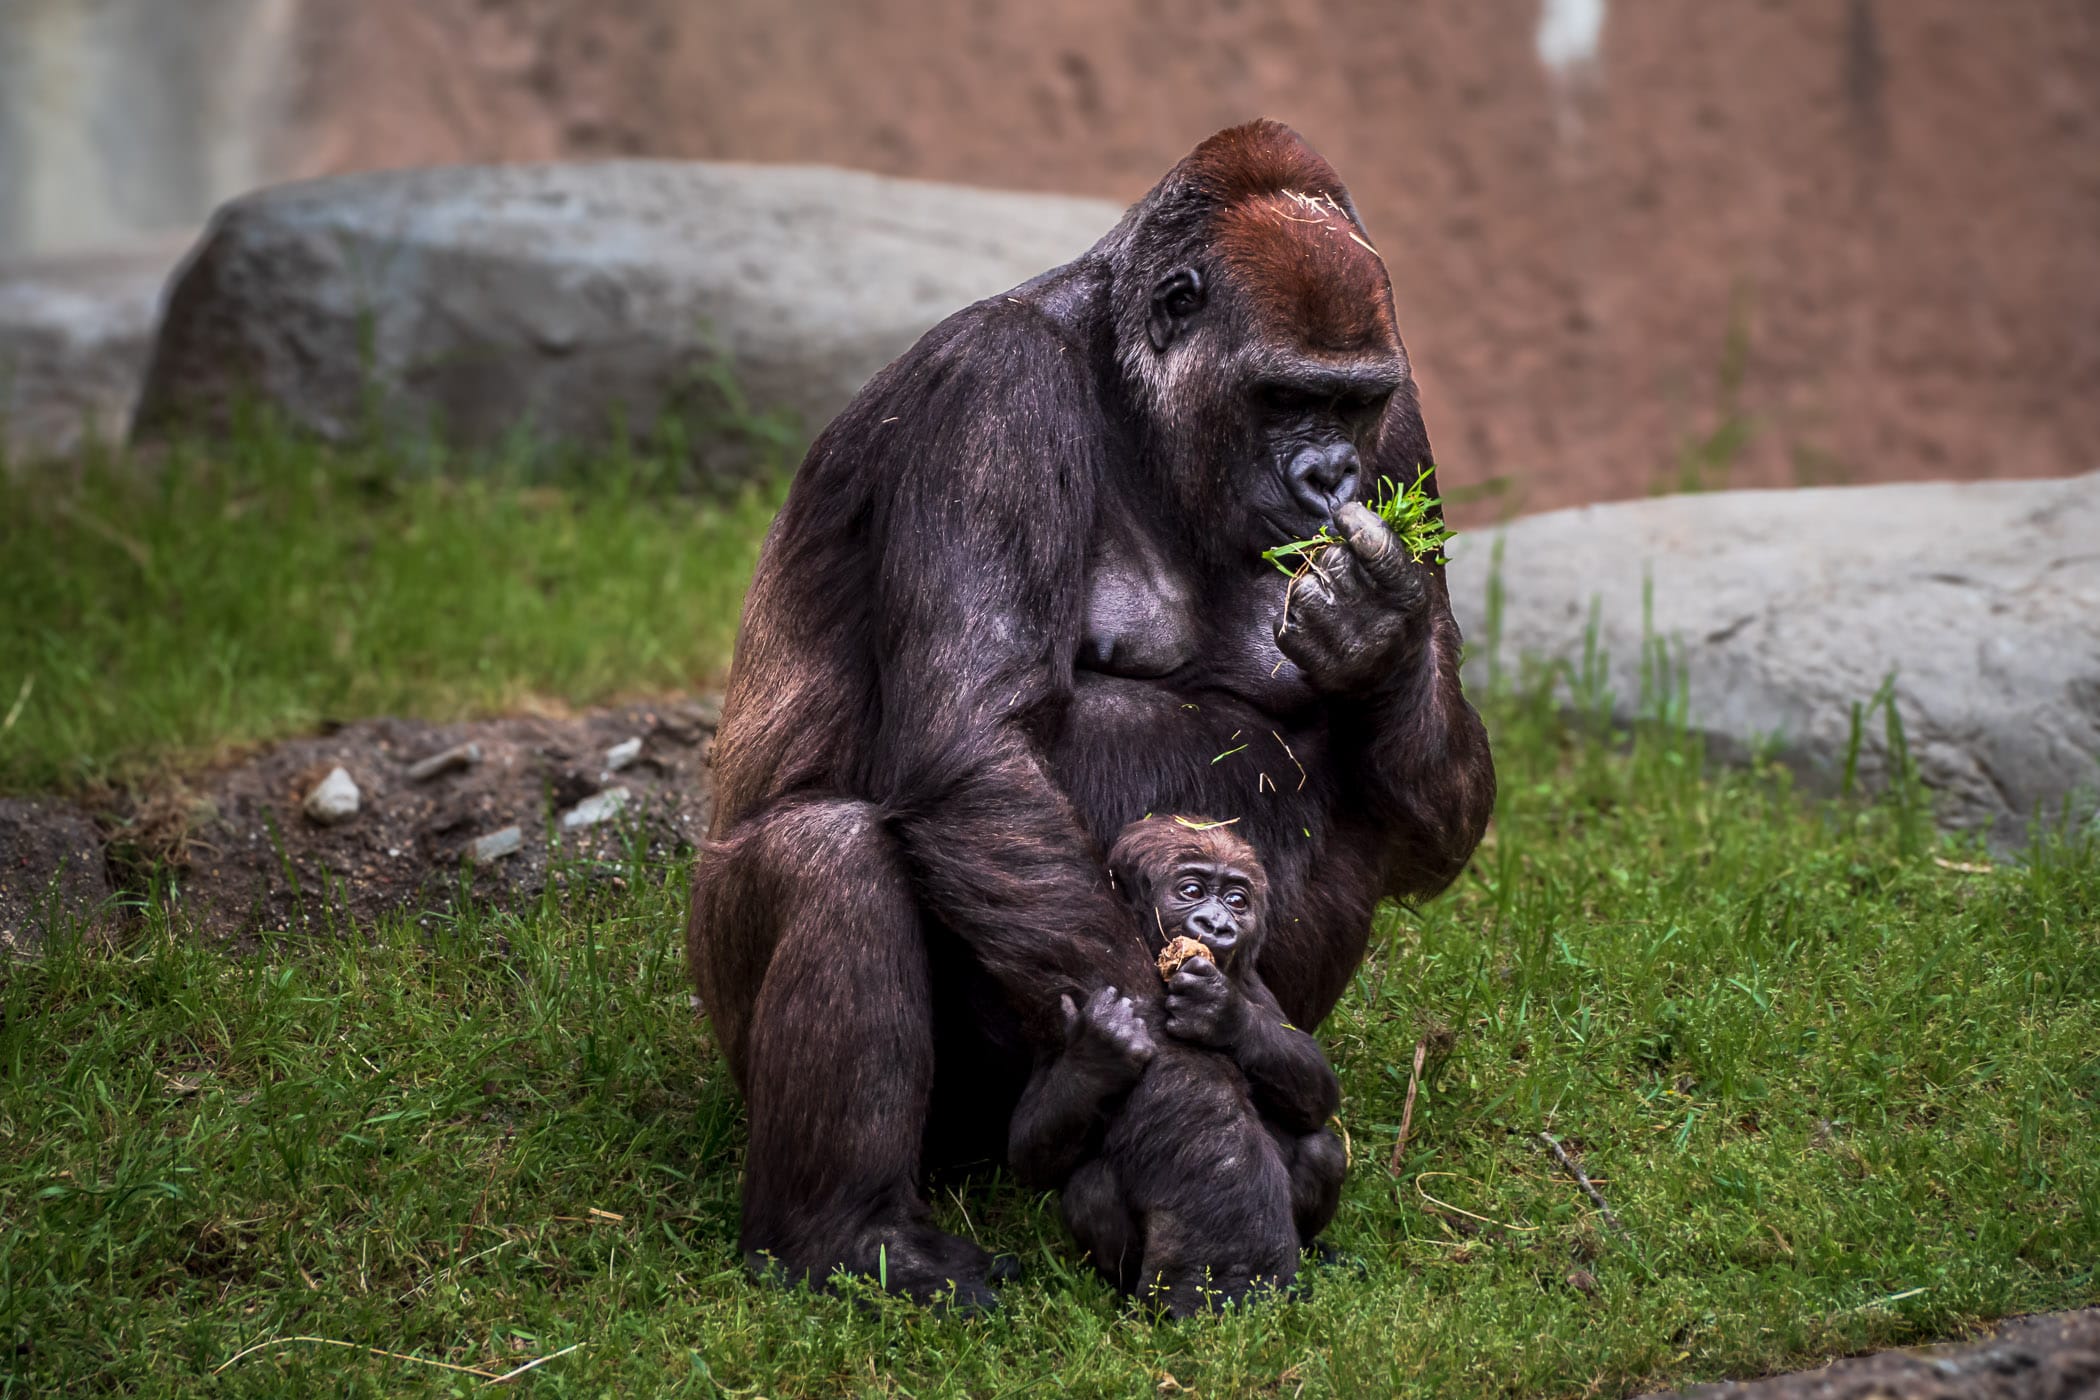 A mother gorilla and her young son at the Fort Worth Zoo, Texas.